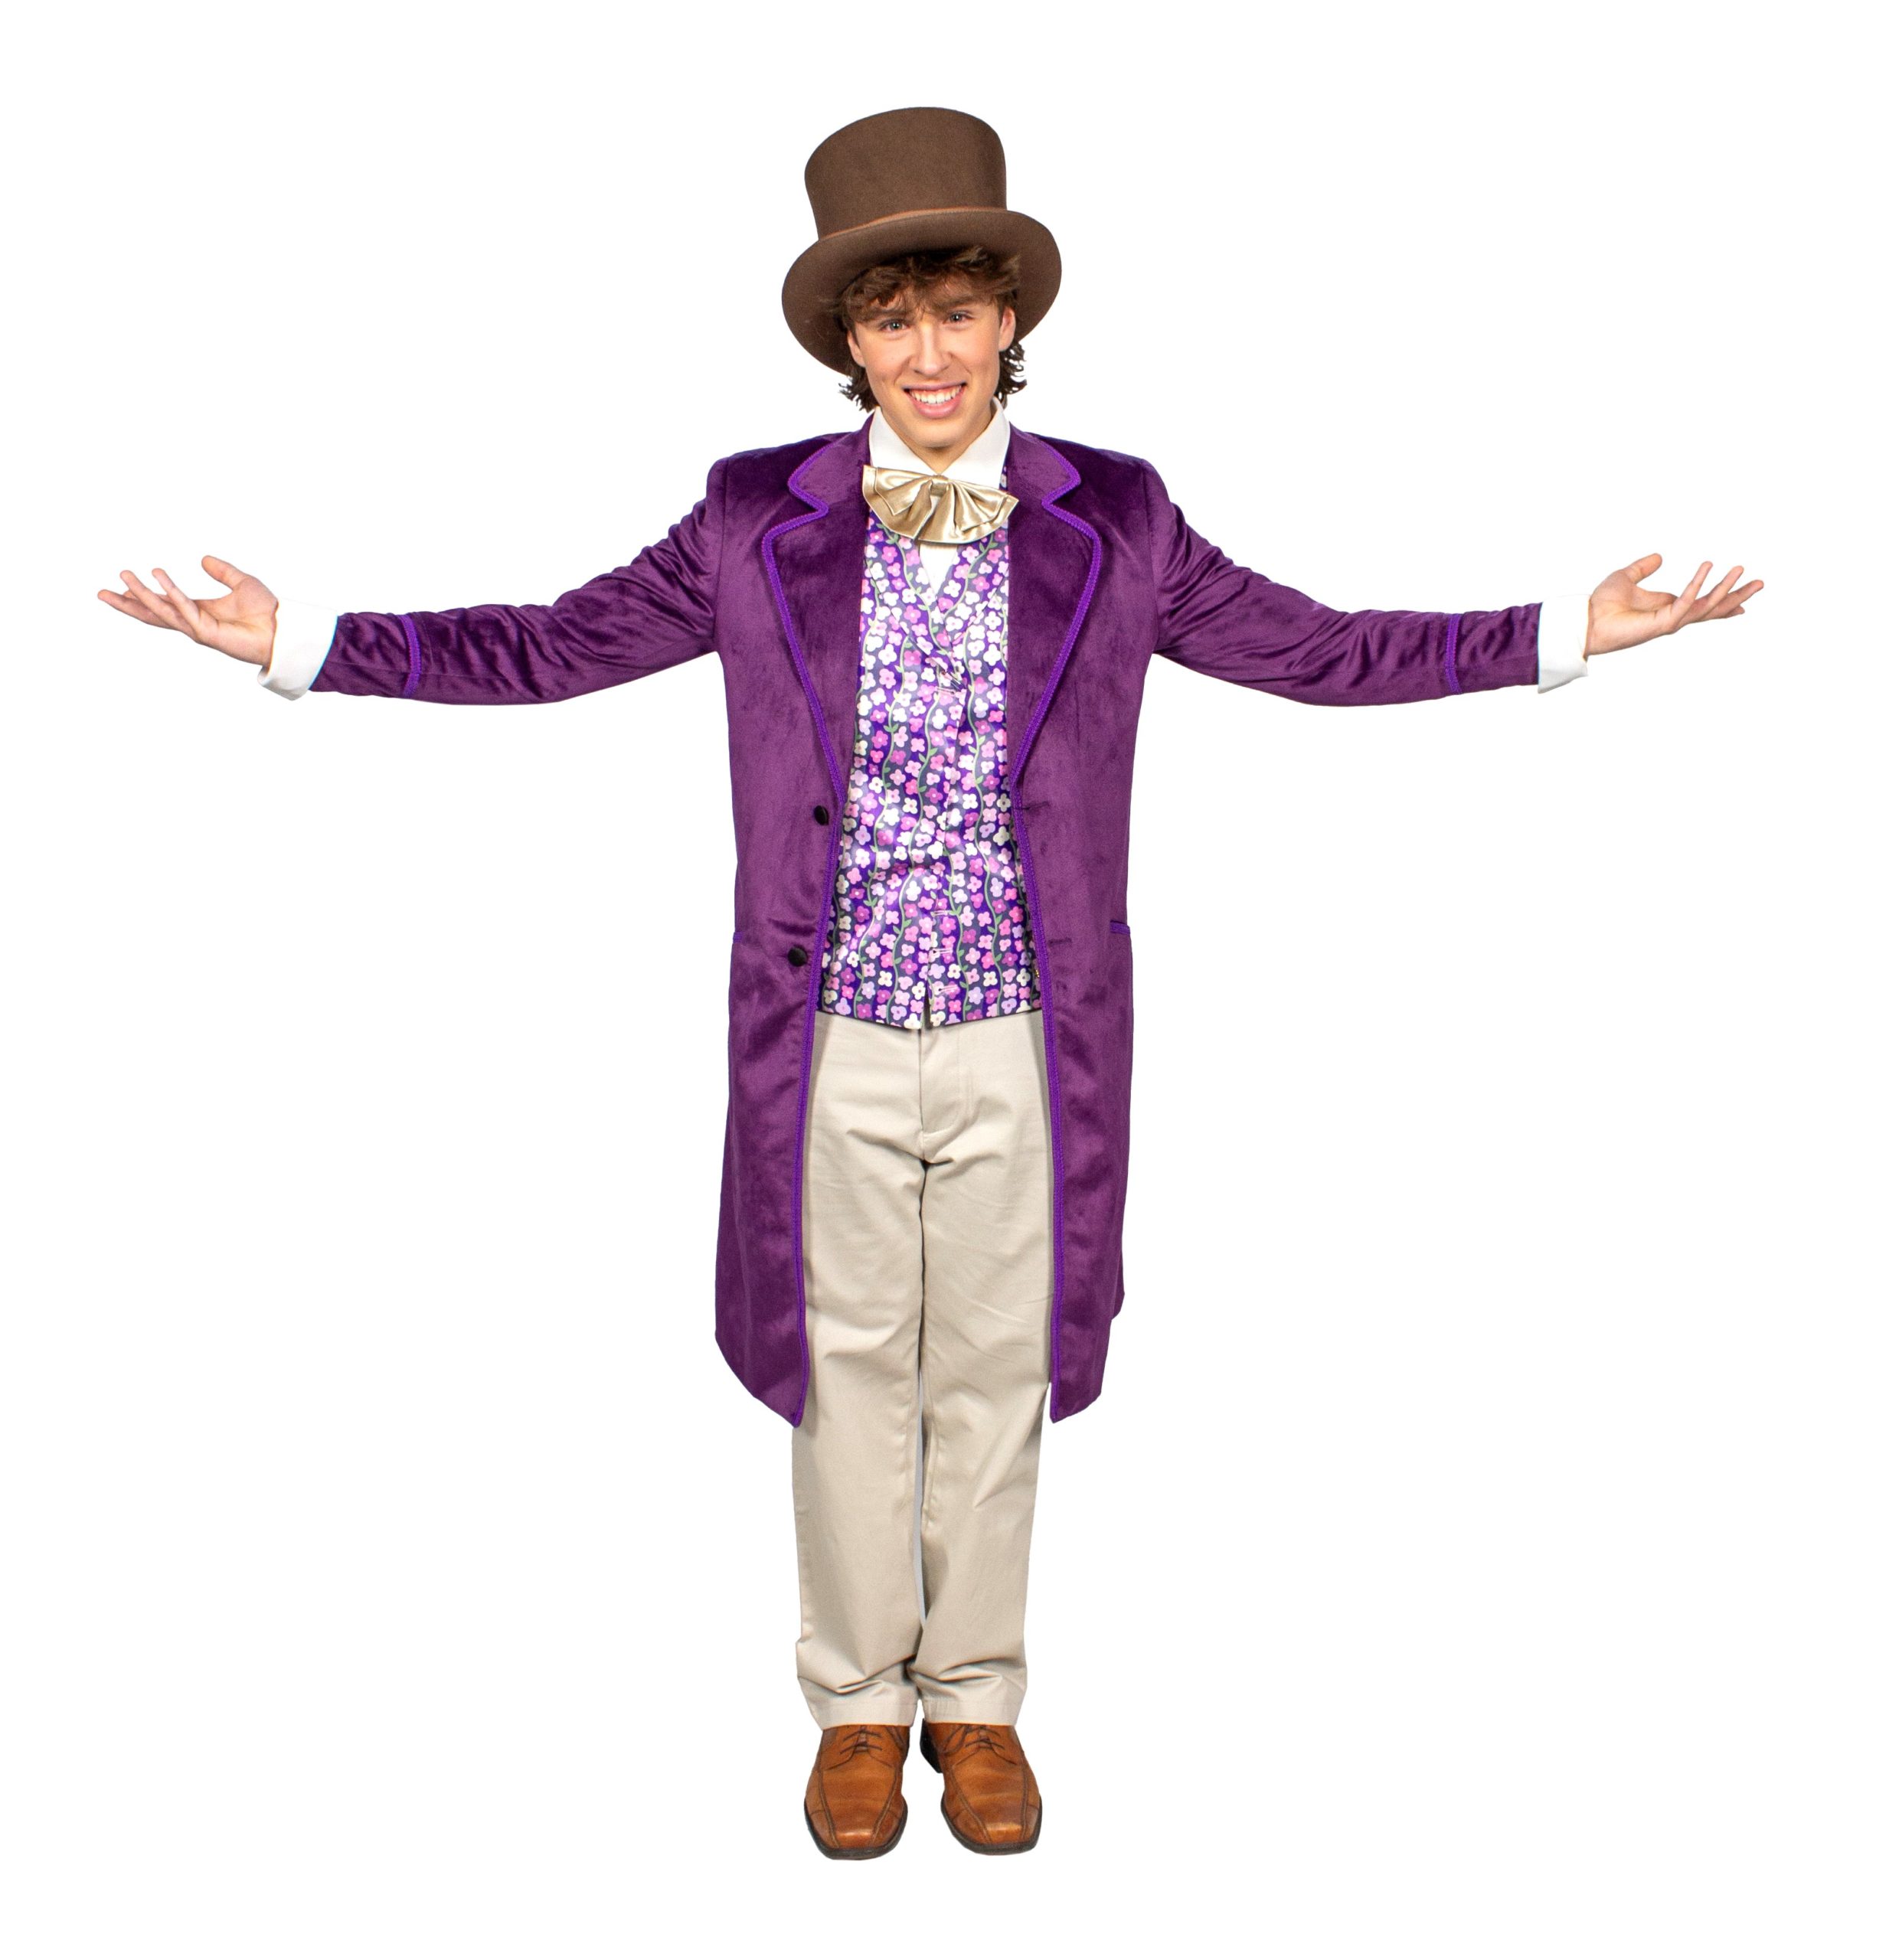 https://events.columbian.com/wp-content/uploads/2023/10/willy-wonka-scaled.jpg